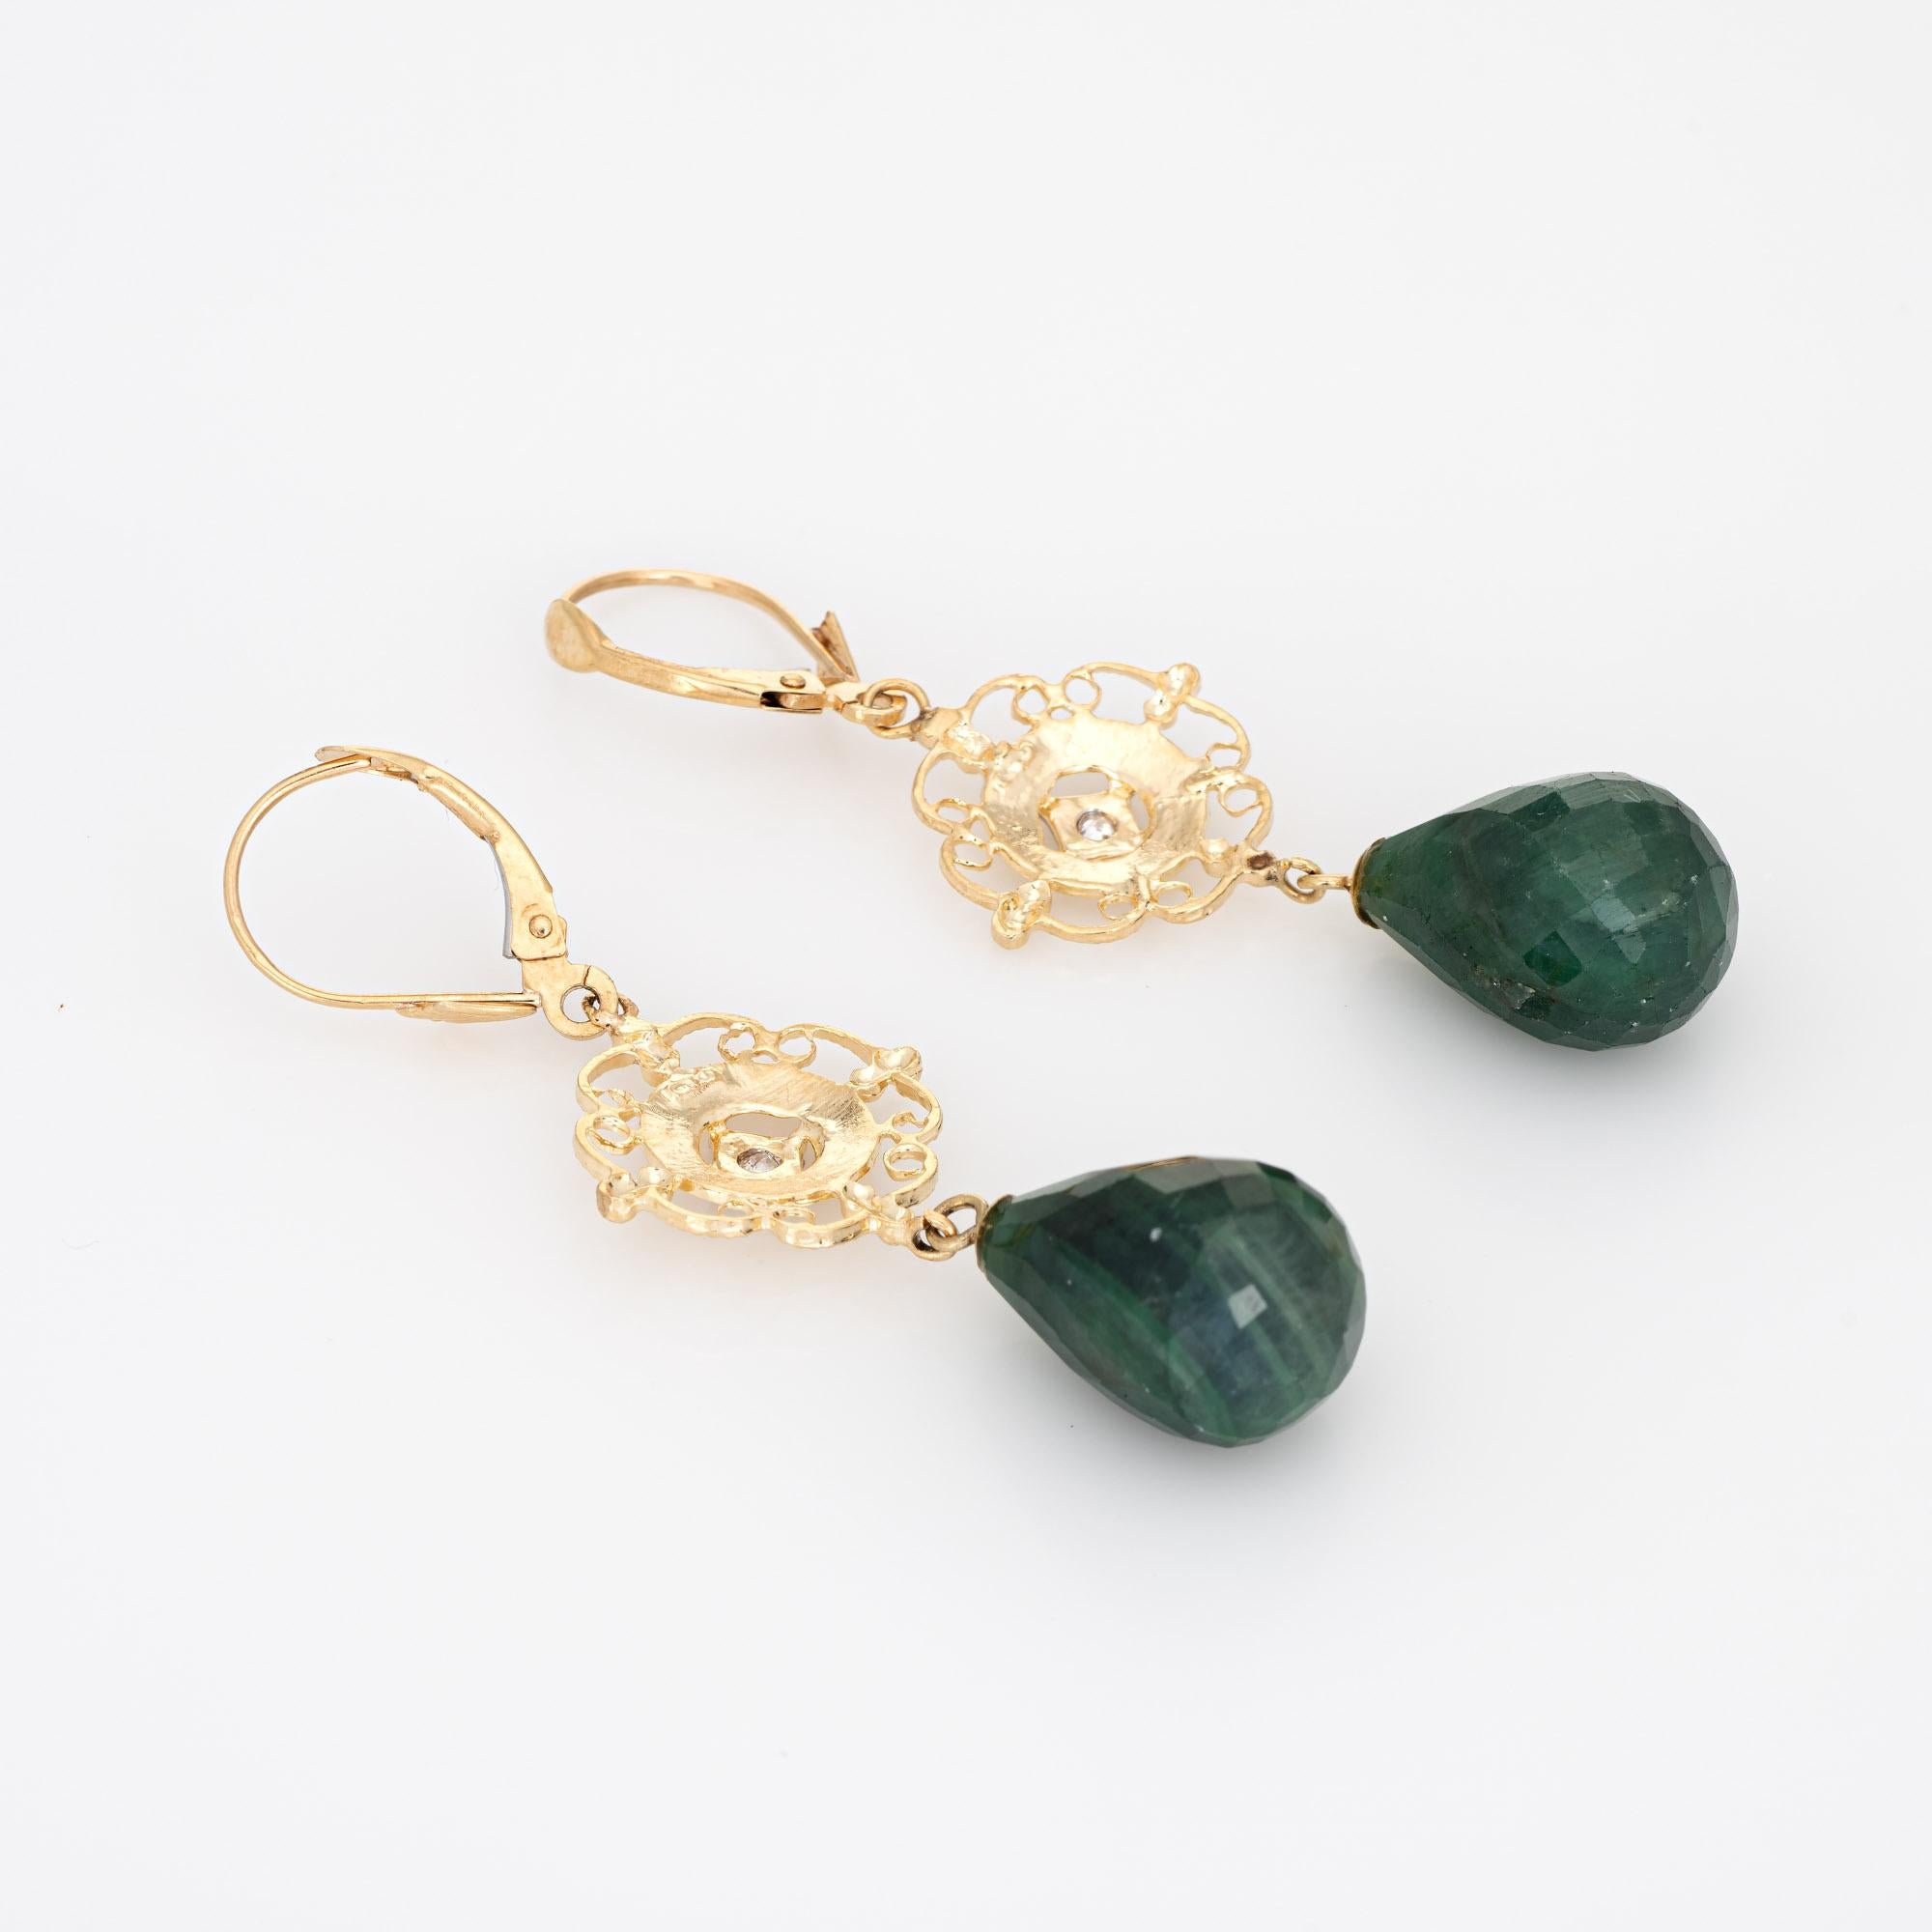 Elegant pair of vintage briolette faceted emerald & diamond earrings crafted in 14k yellow gold. 

Briolette faceted emeralds measure 15mm x 10.5mm. The diamonds total an estimated 0.02 carats (estimated at H-I color and I1 clarity). 

The elegant